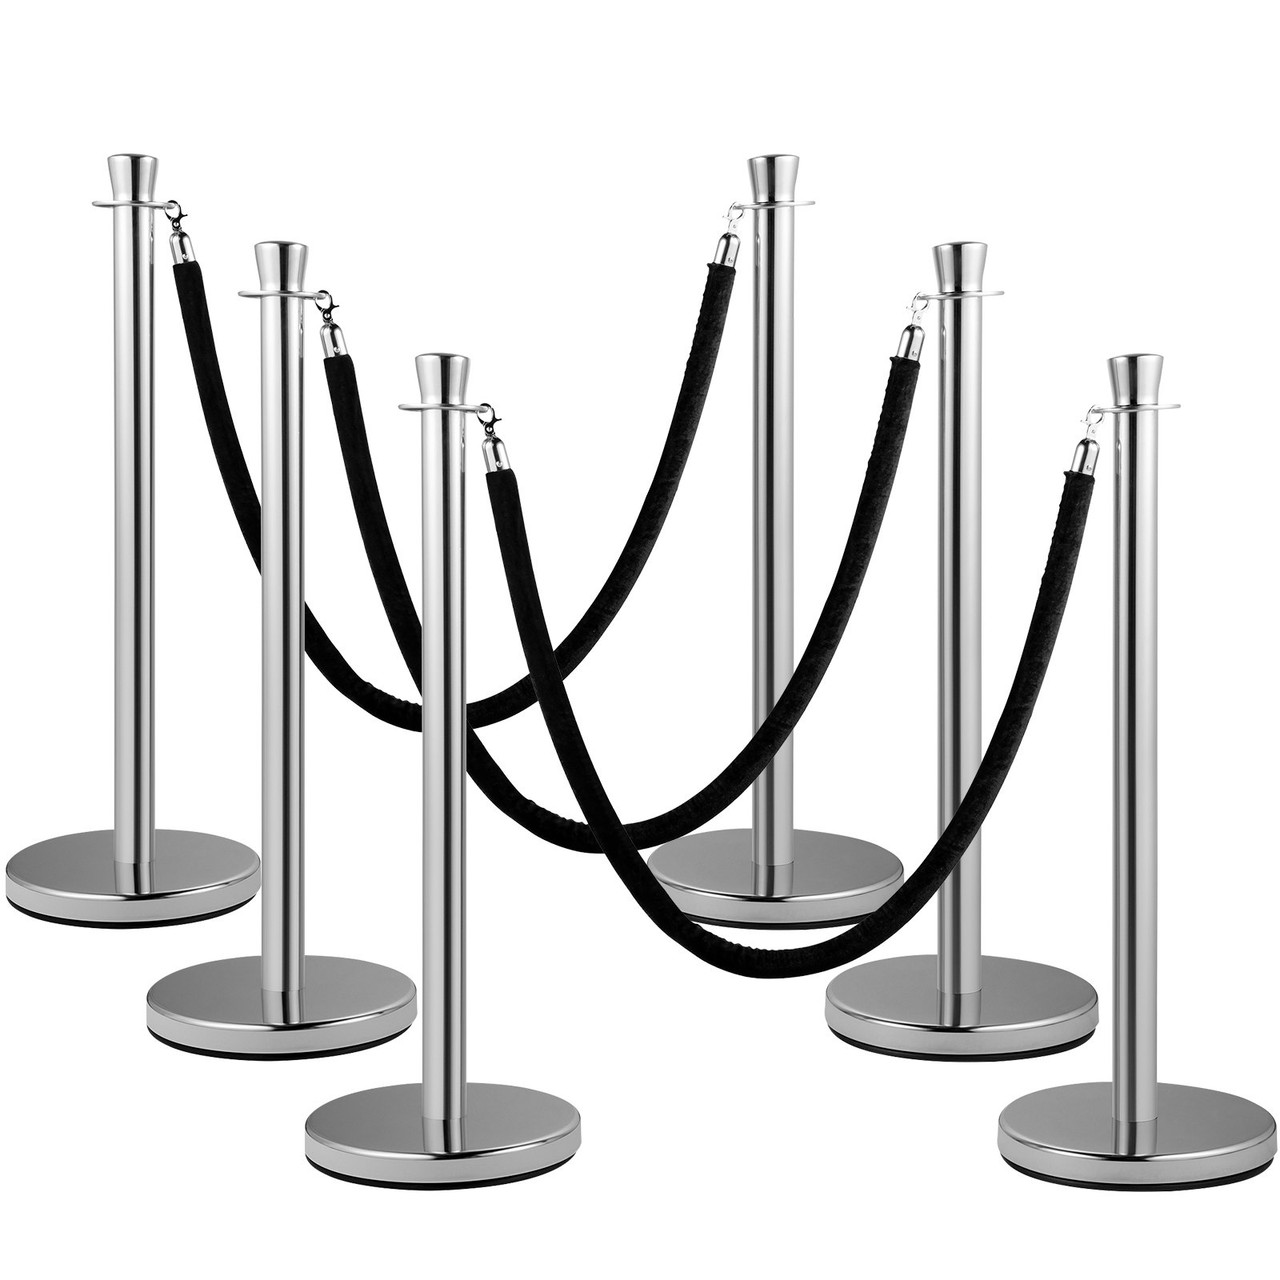 Crowd Control Stanchion, Set of 2 Pieces Stanchion Set, Stanchion Set with 5 ft/1.5 m Black Velvet Rope, Silver Crowd Control Barrier w/Sturdy Concrete and Metal Base - Easy Connect Assembly